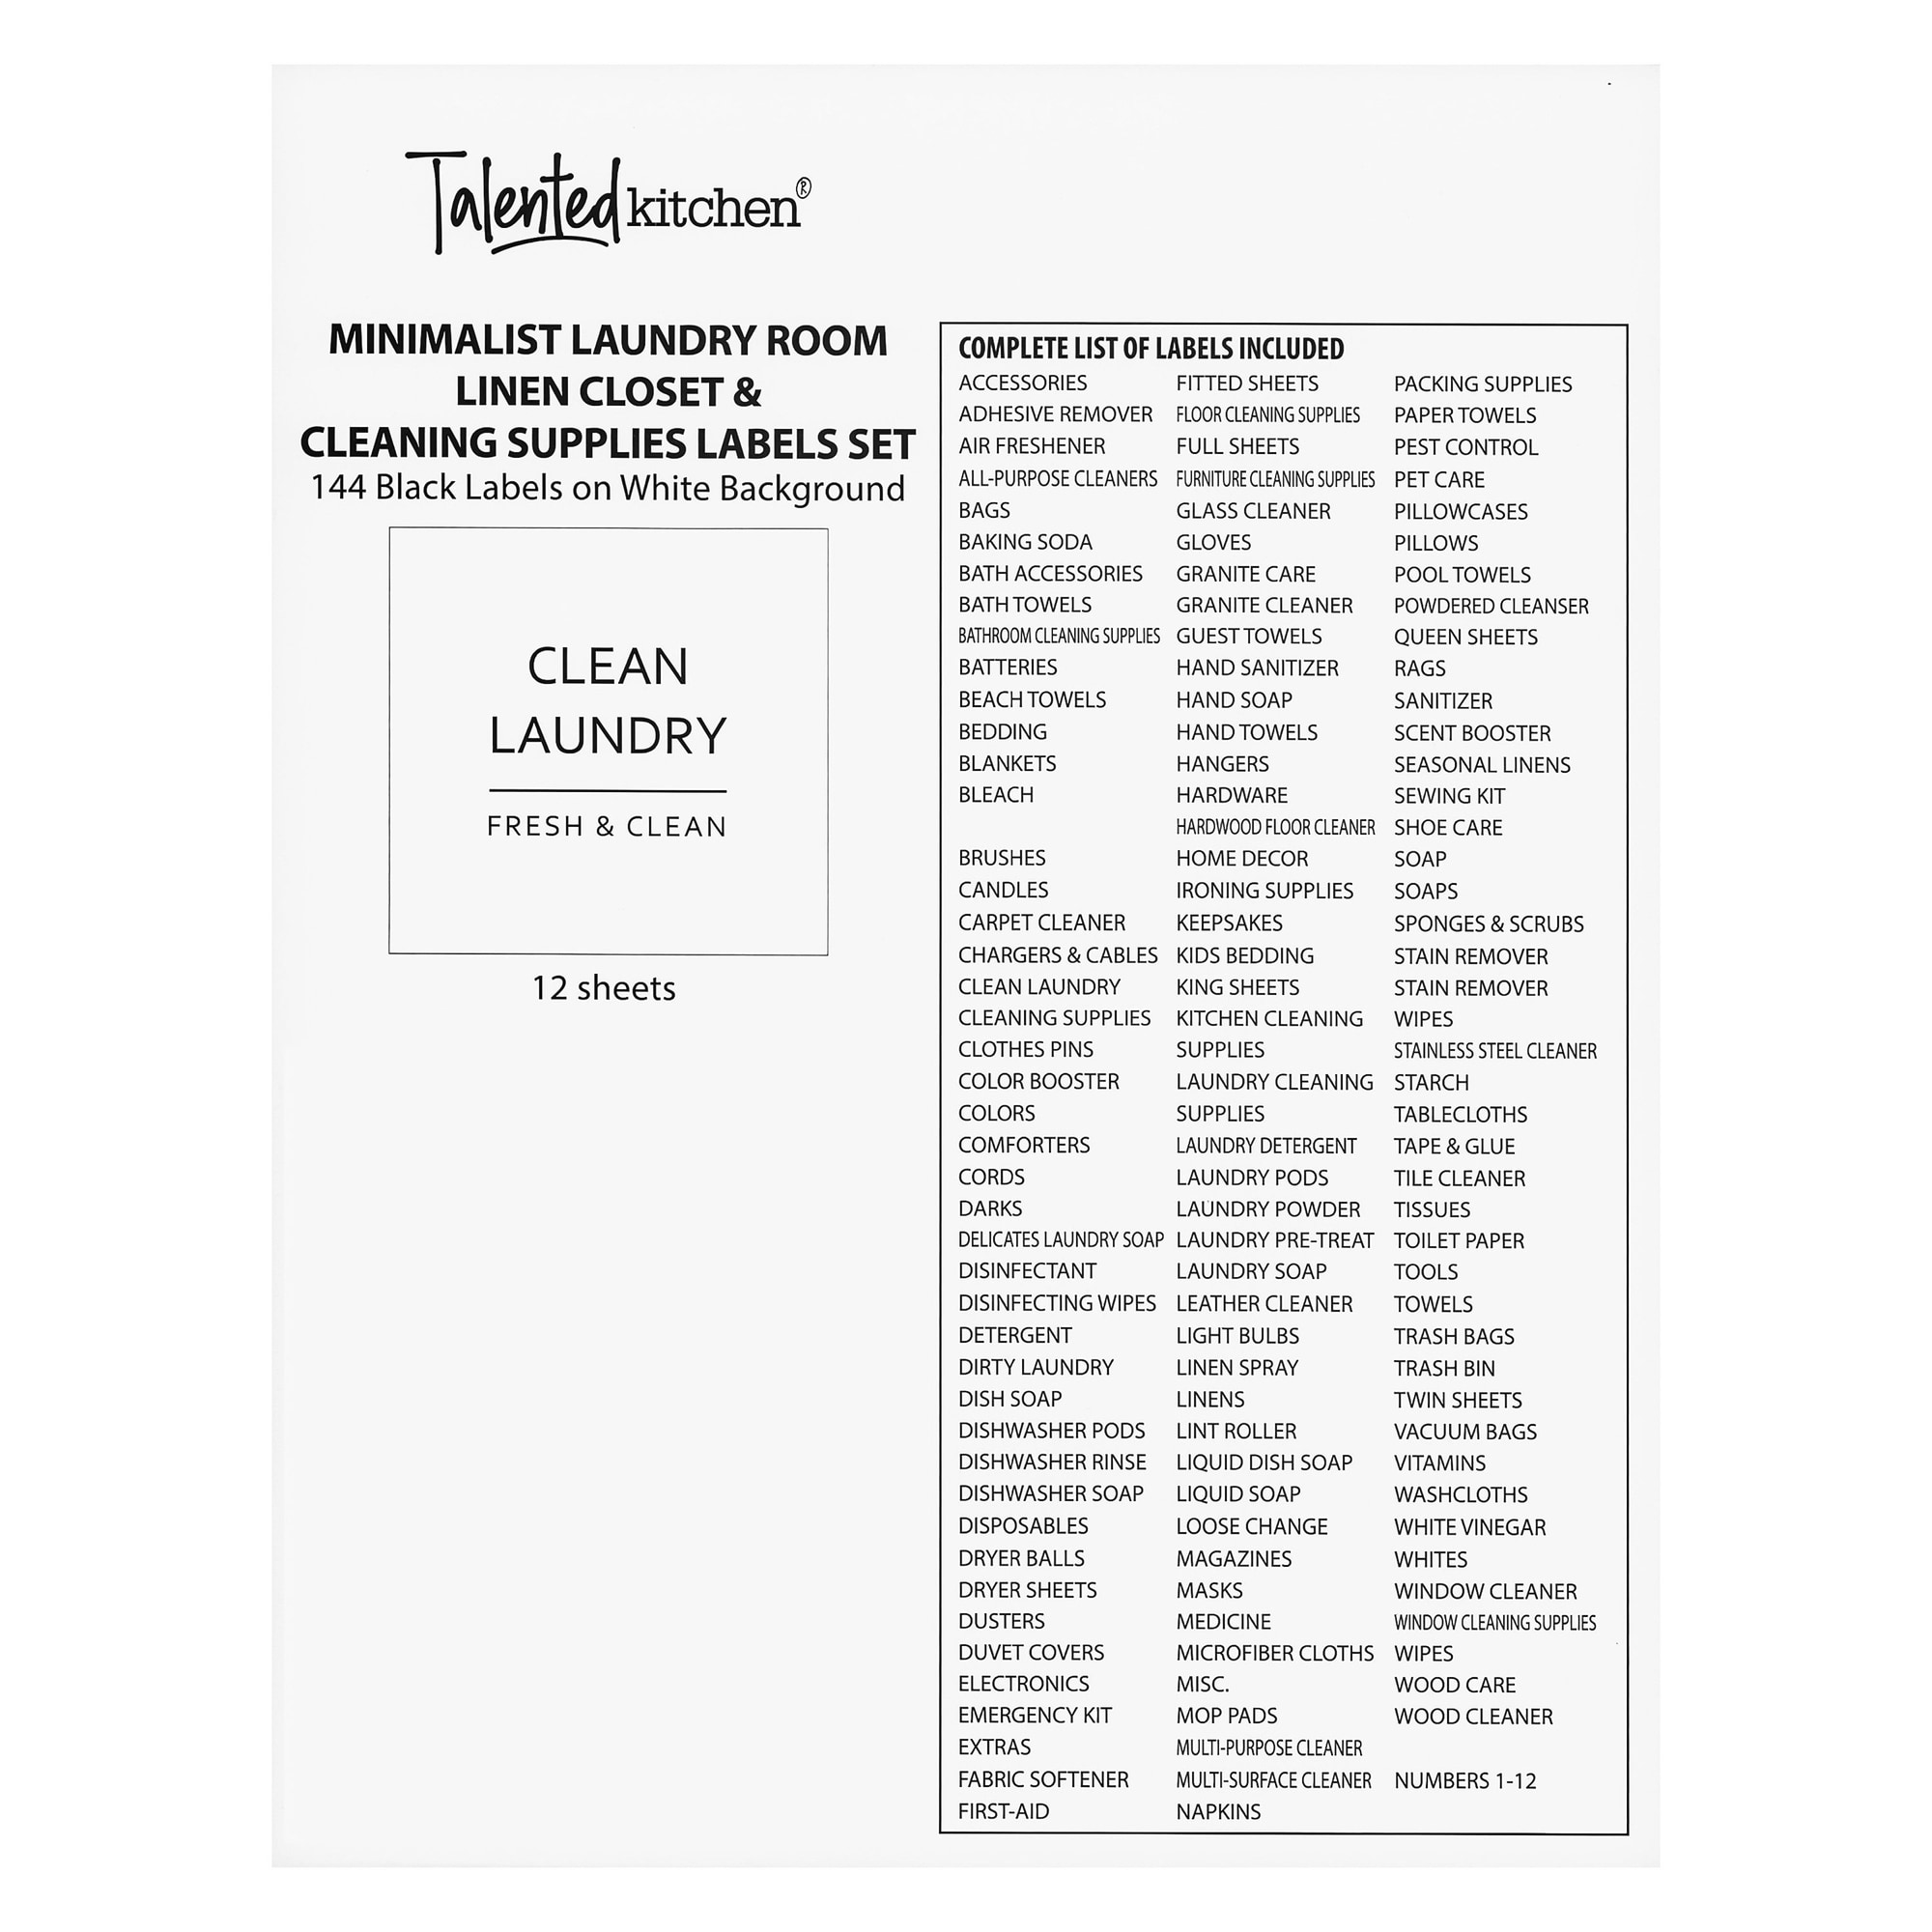 Talented Kitchen 144 Minimalistic Laundry Room Labels for Glass Jars,  Preprinted Linen Closet Stickers for Containers, Bathroom Organization,  Gold - ShopStyle Home Office